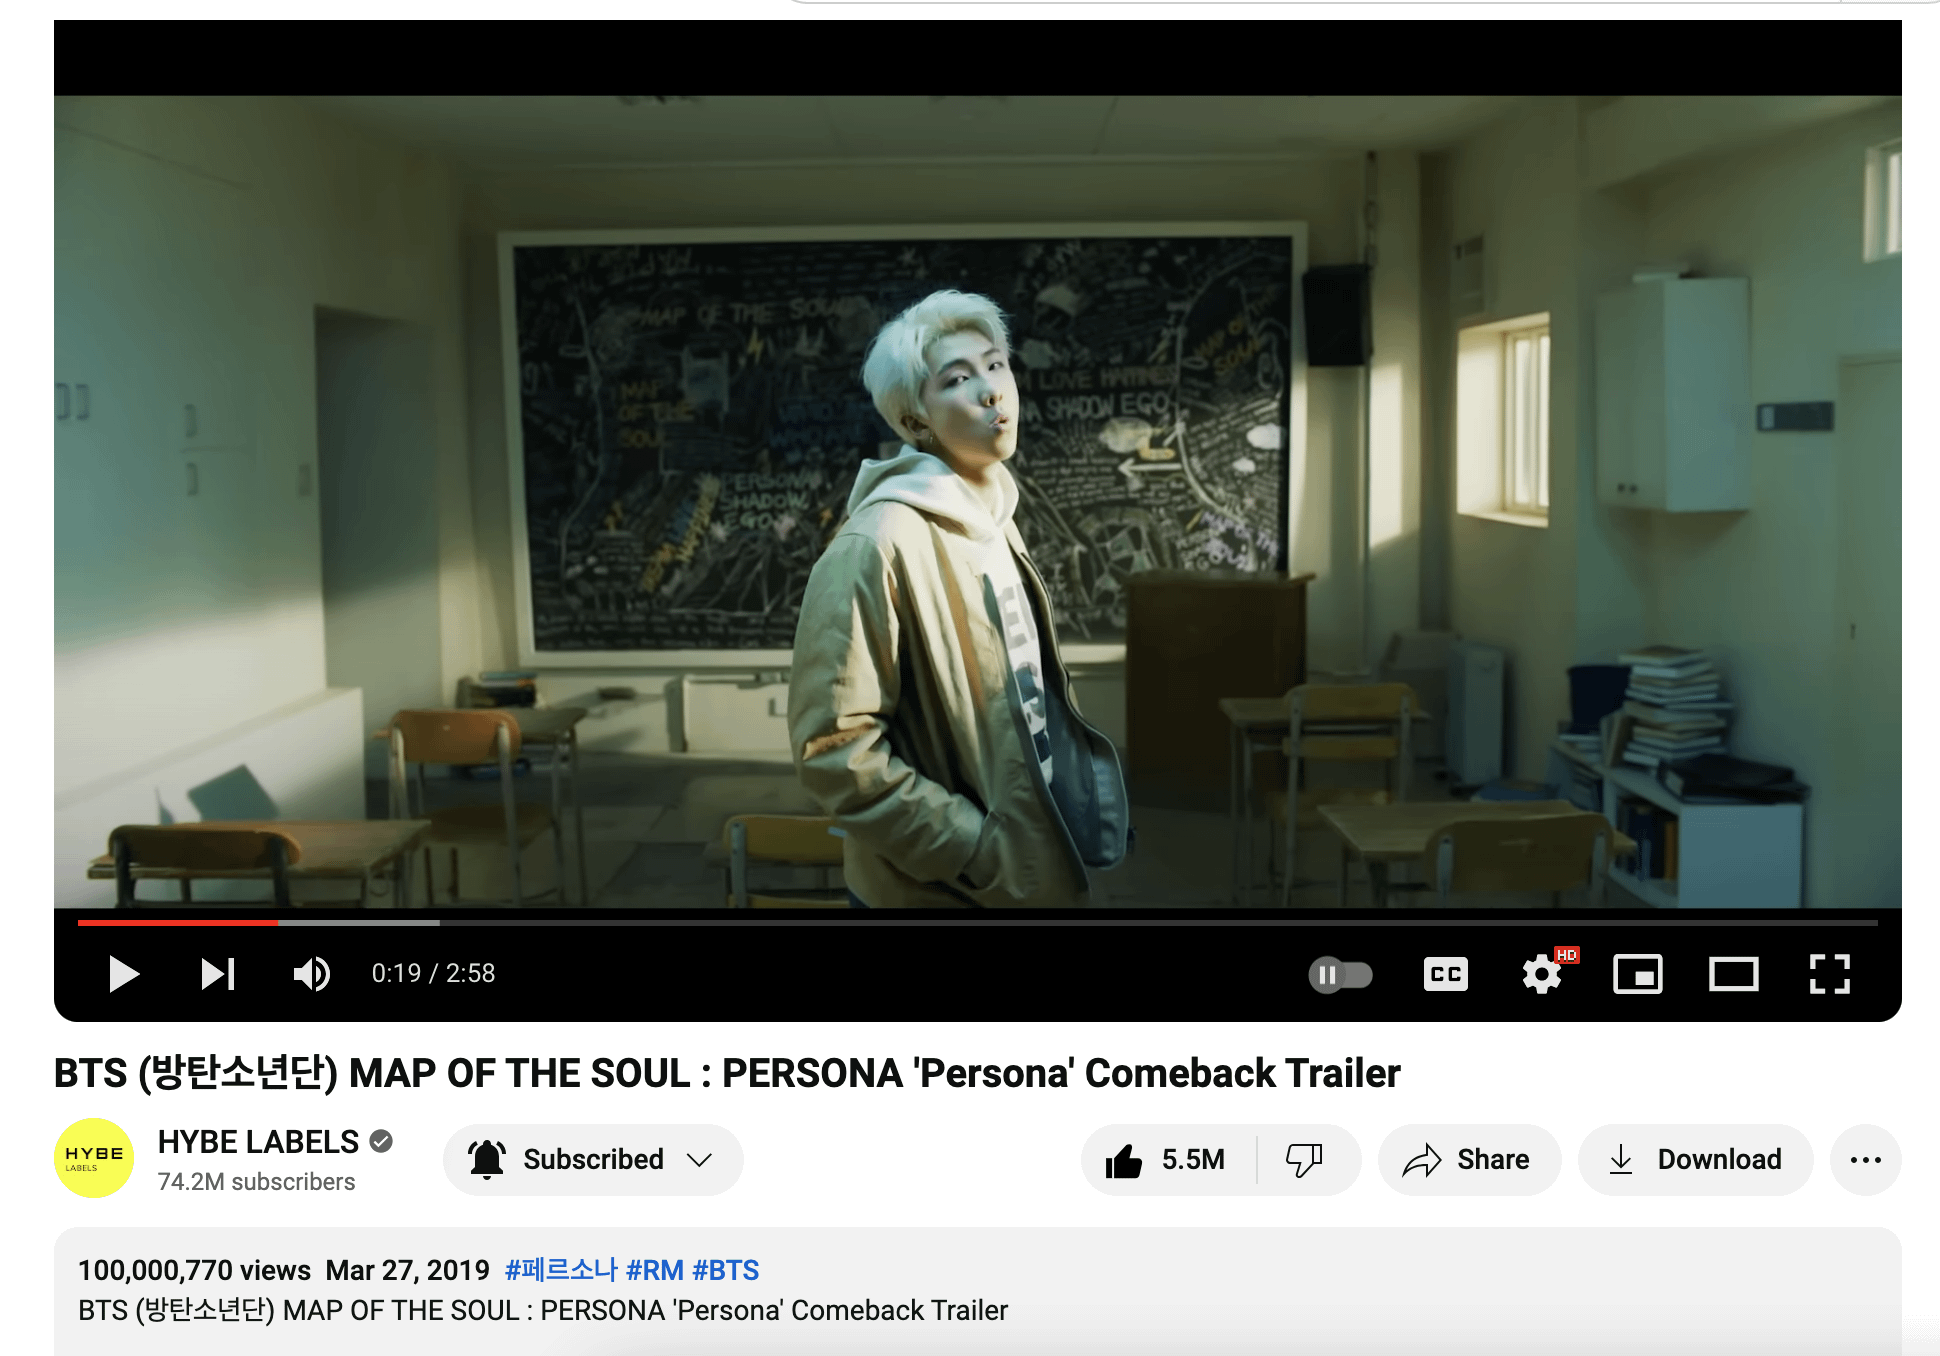 "MAP OF THE SOUL : PERSONA 'Persona' Comeback Trailer" has now surpassed 100 million views on YouTube! - 210324